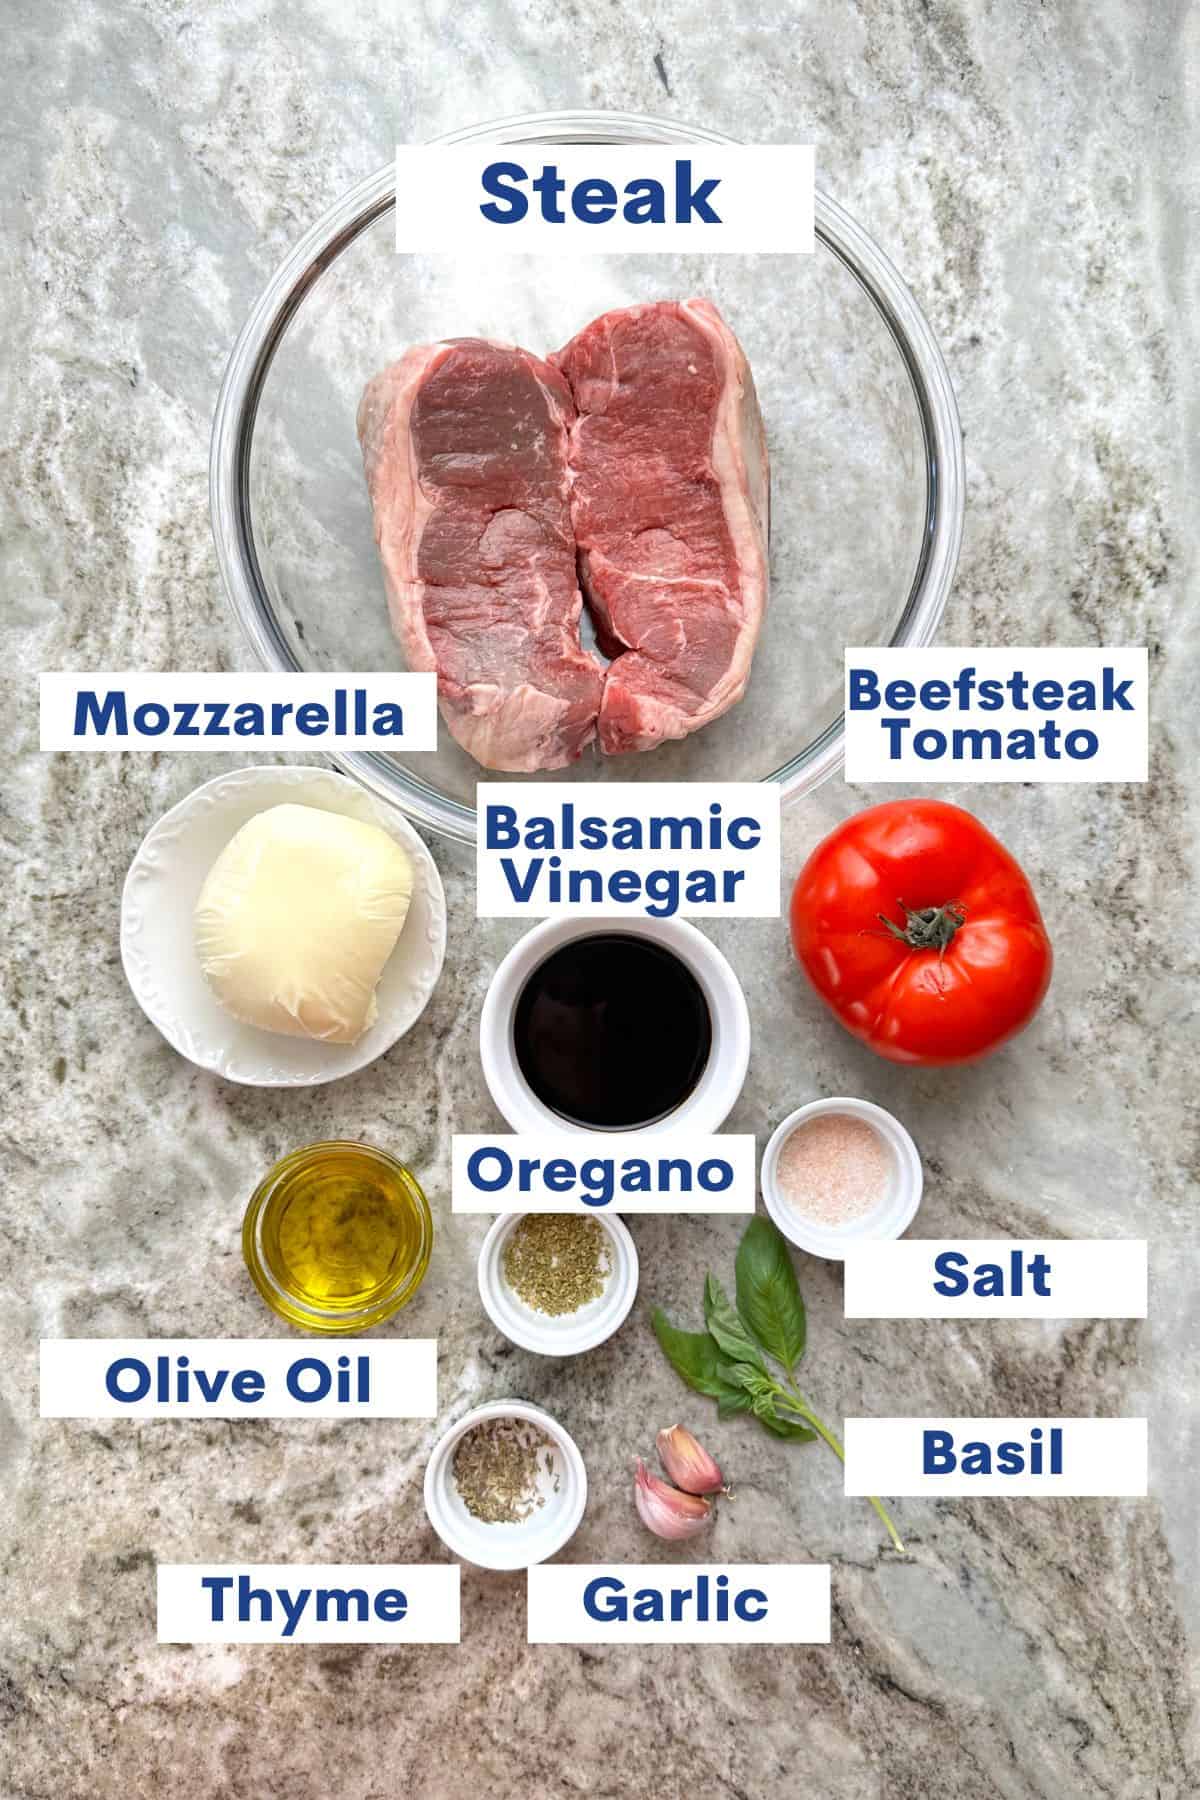 ingredients used for this recipe.